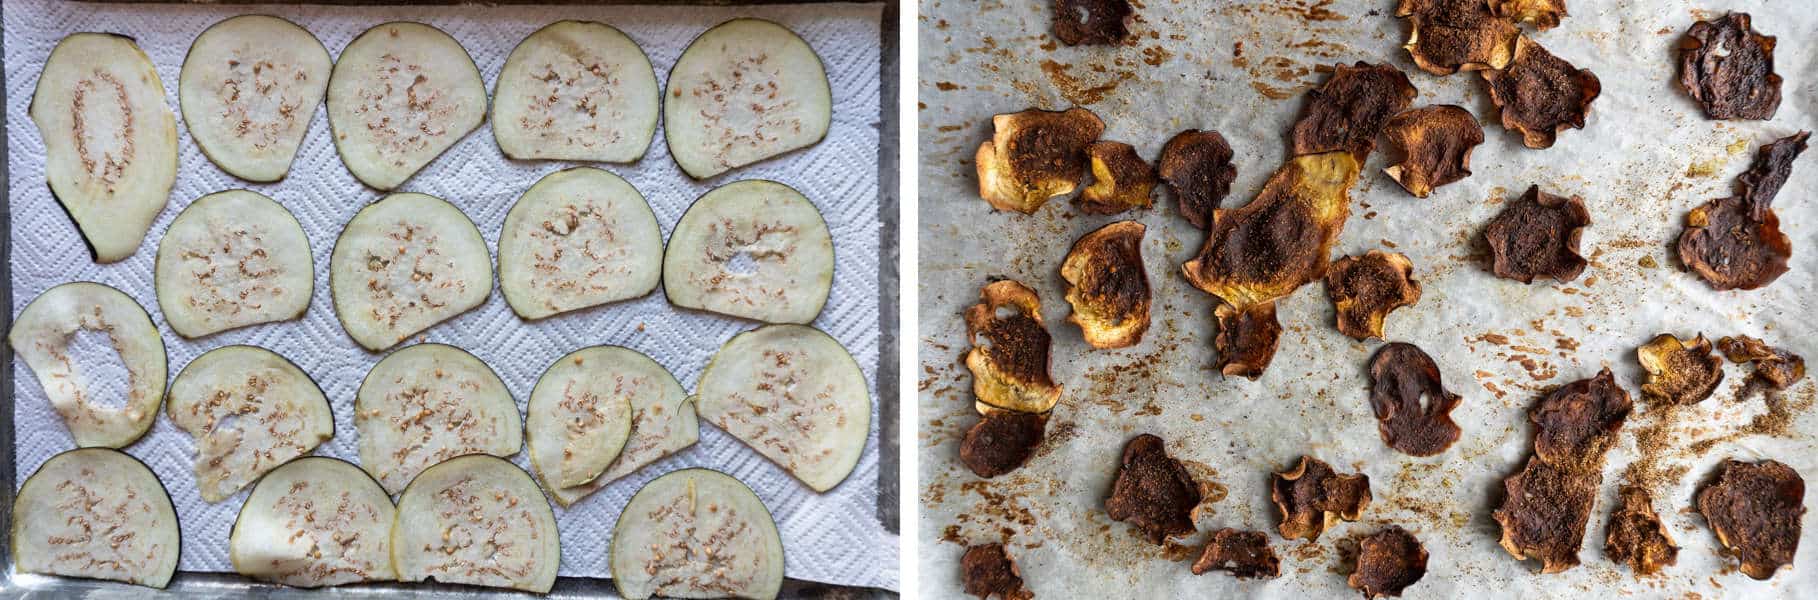 Eggplants before and after baking